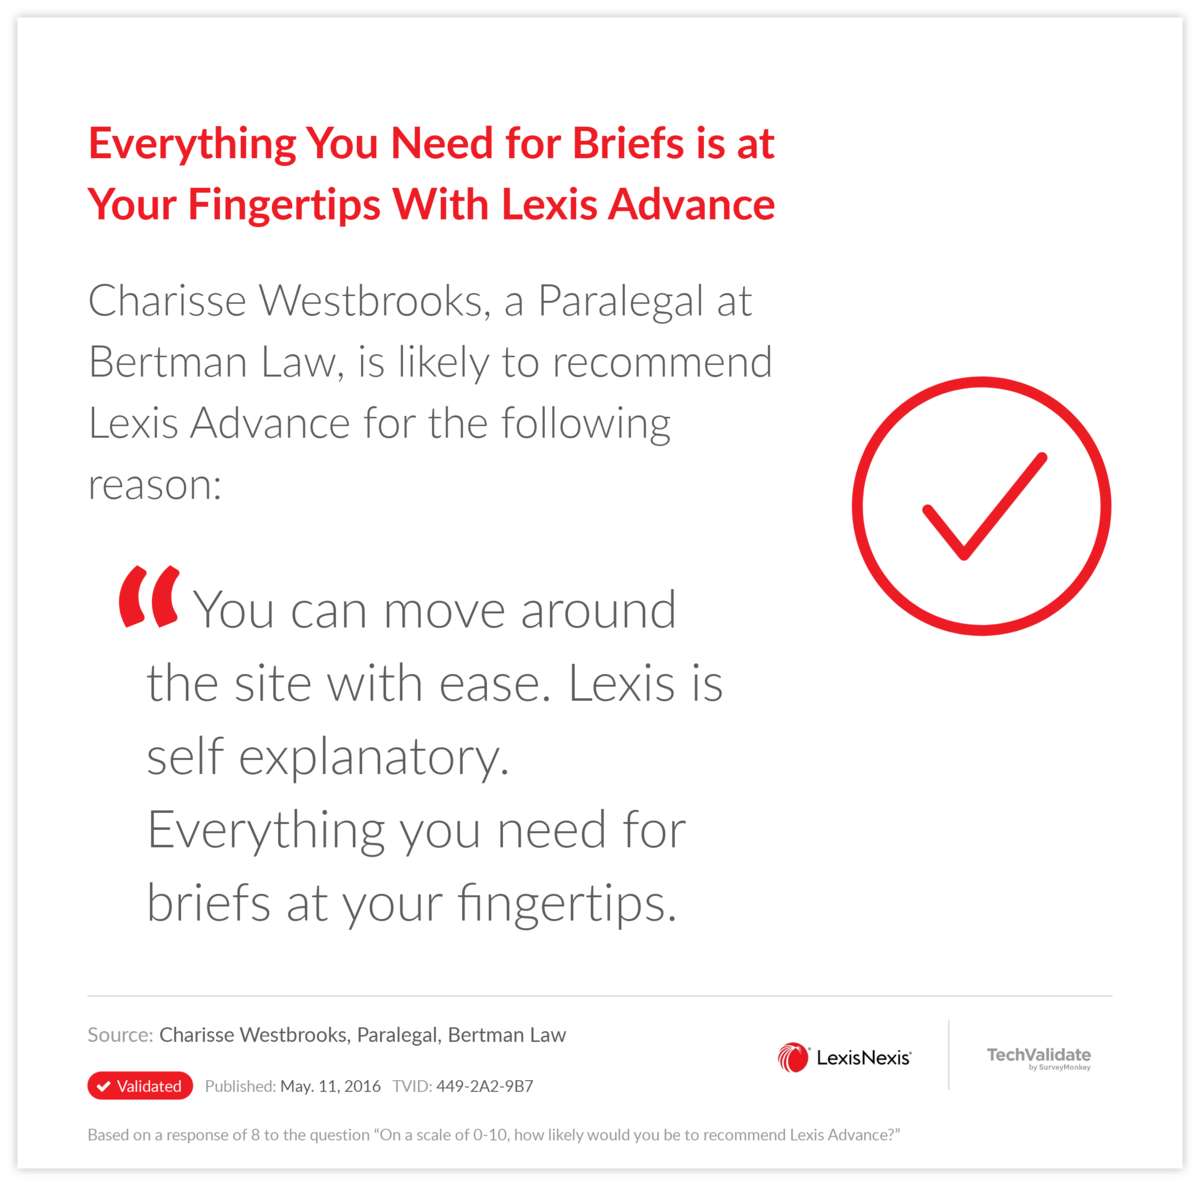 Everything You Need for Briefs is at Your Fingertips With Lexis Advance